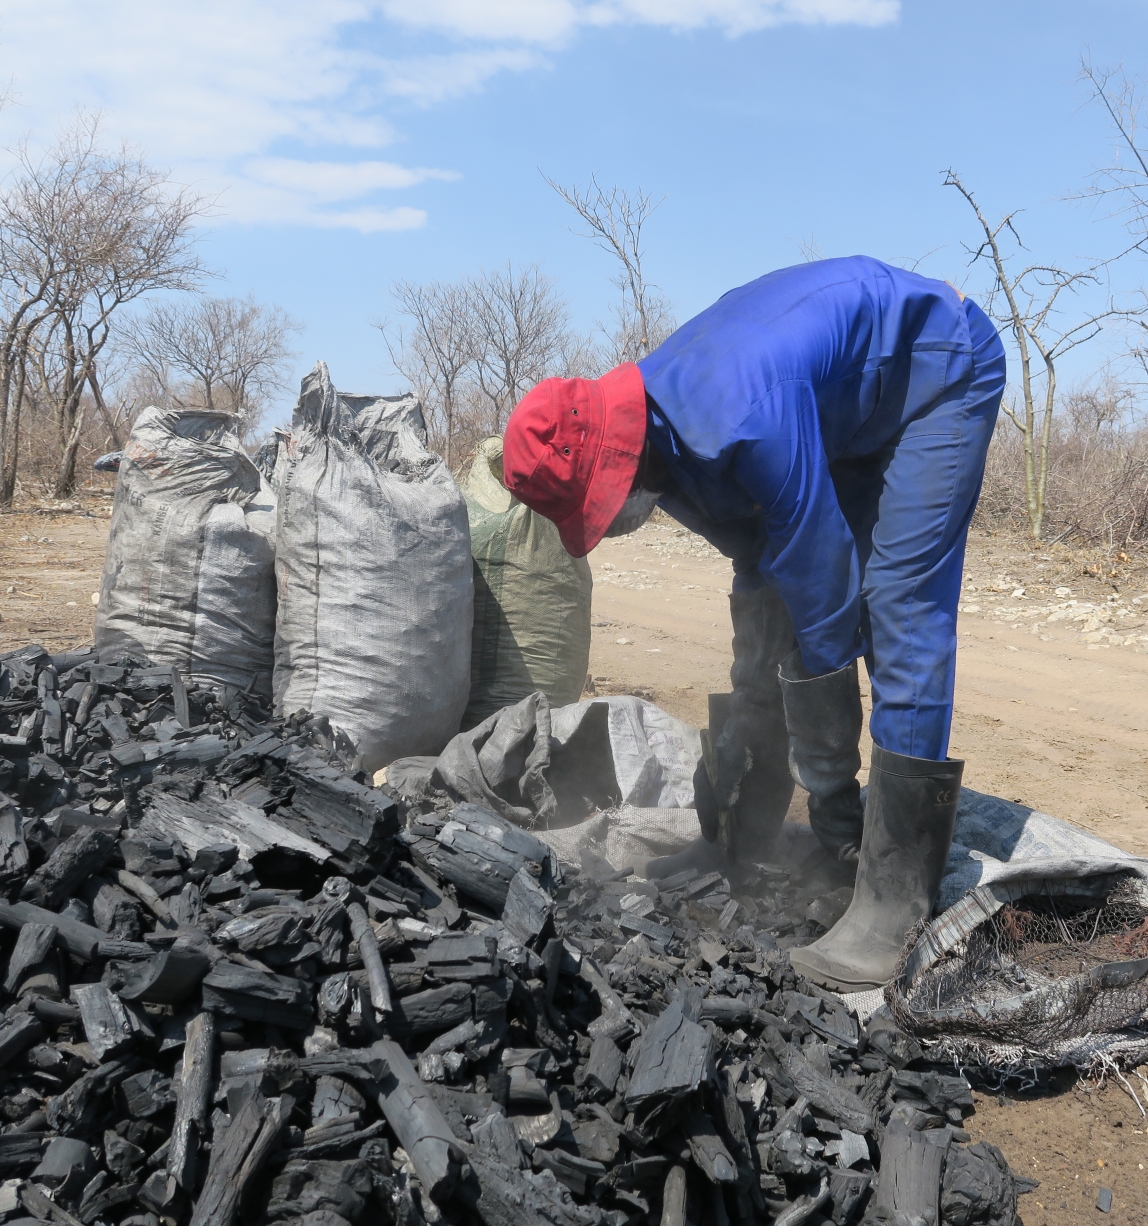 worker bending over to inspect pile of charcoal